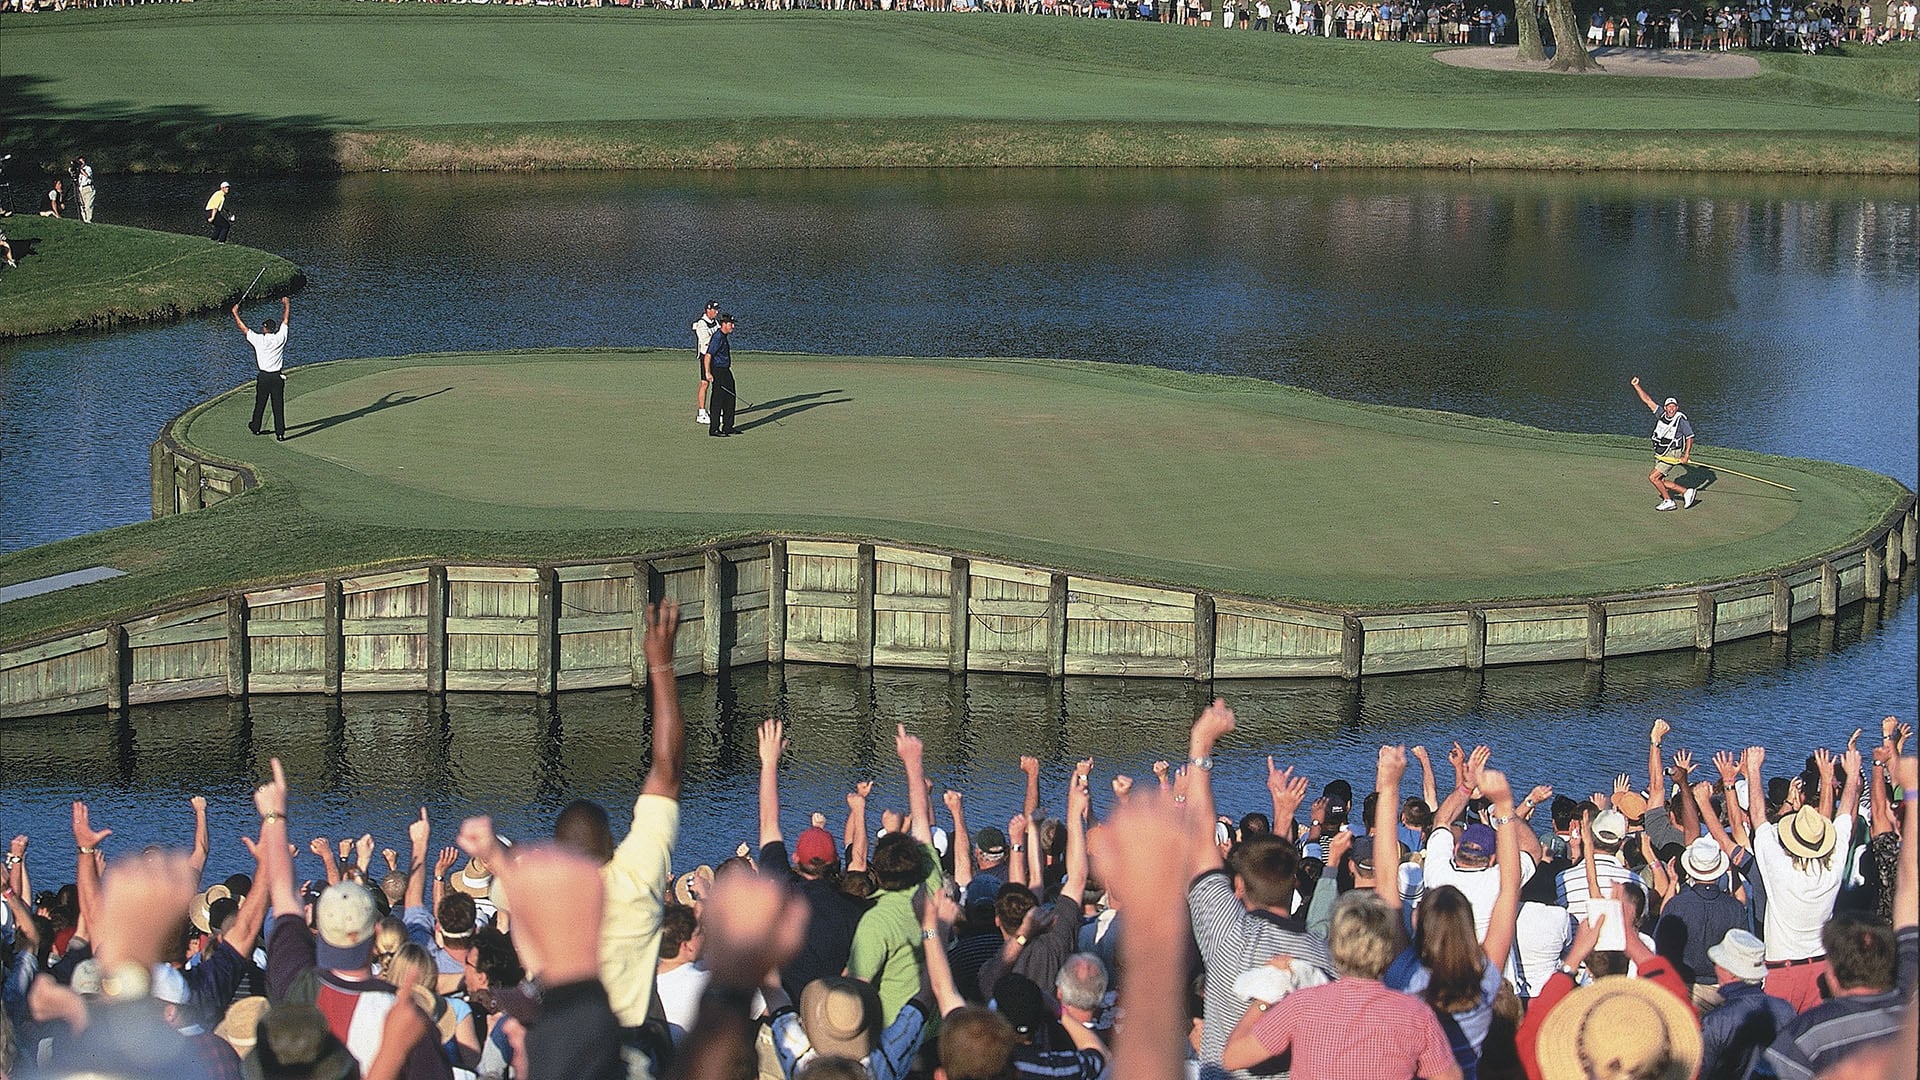 Players Championship pays tribute to Tiger Woods’ ‘Better than most’ putt